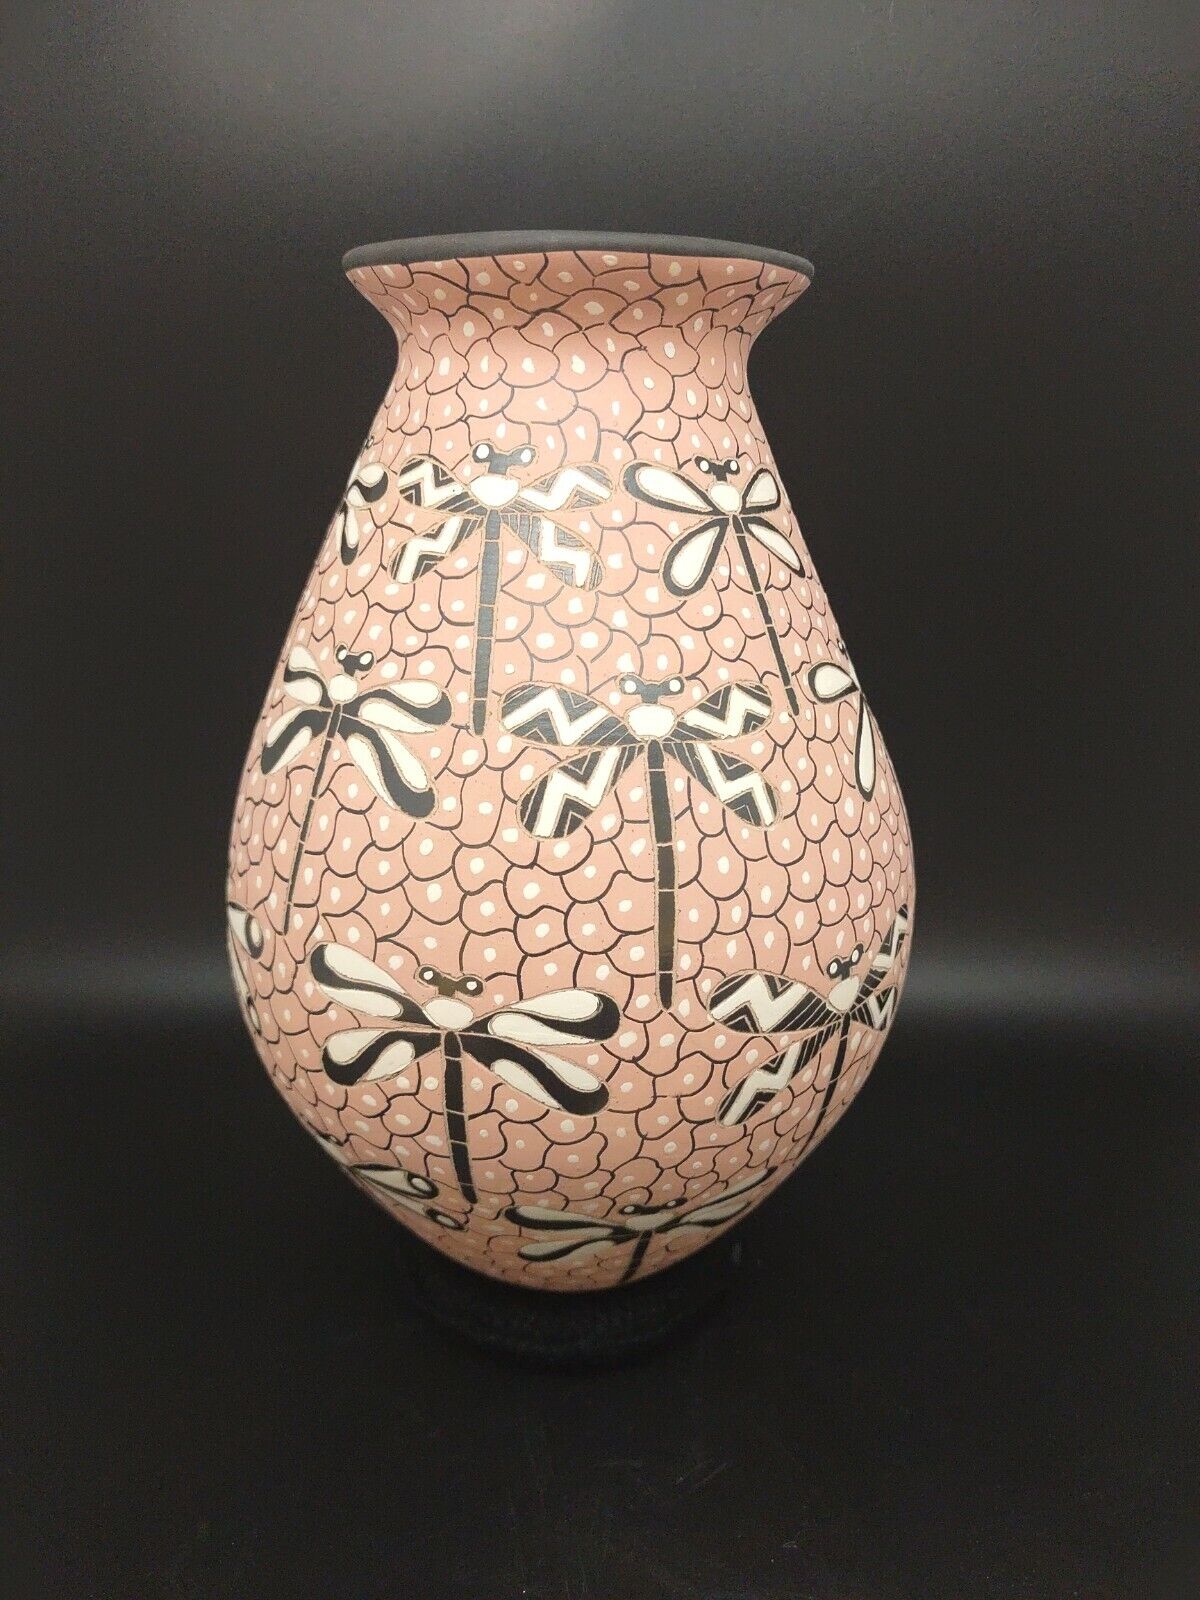 MATA ORTIZ POTTERY by Handpainted and etched by Artist ELICENA COTA